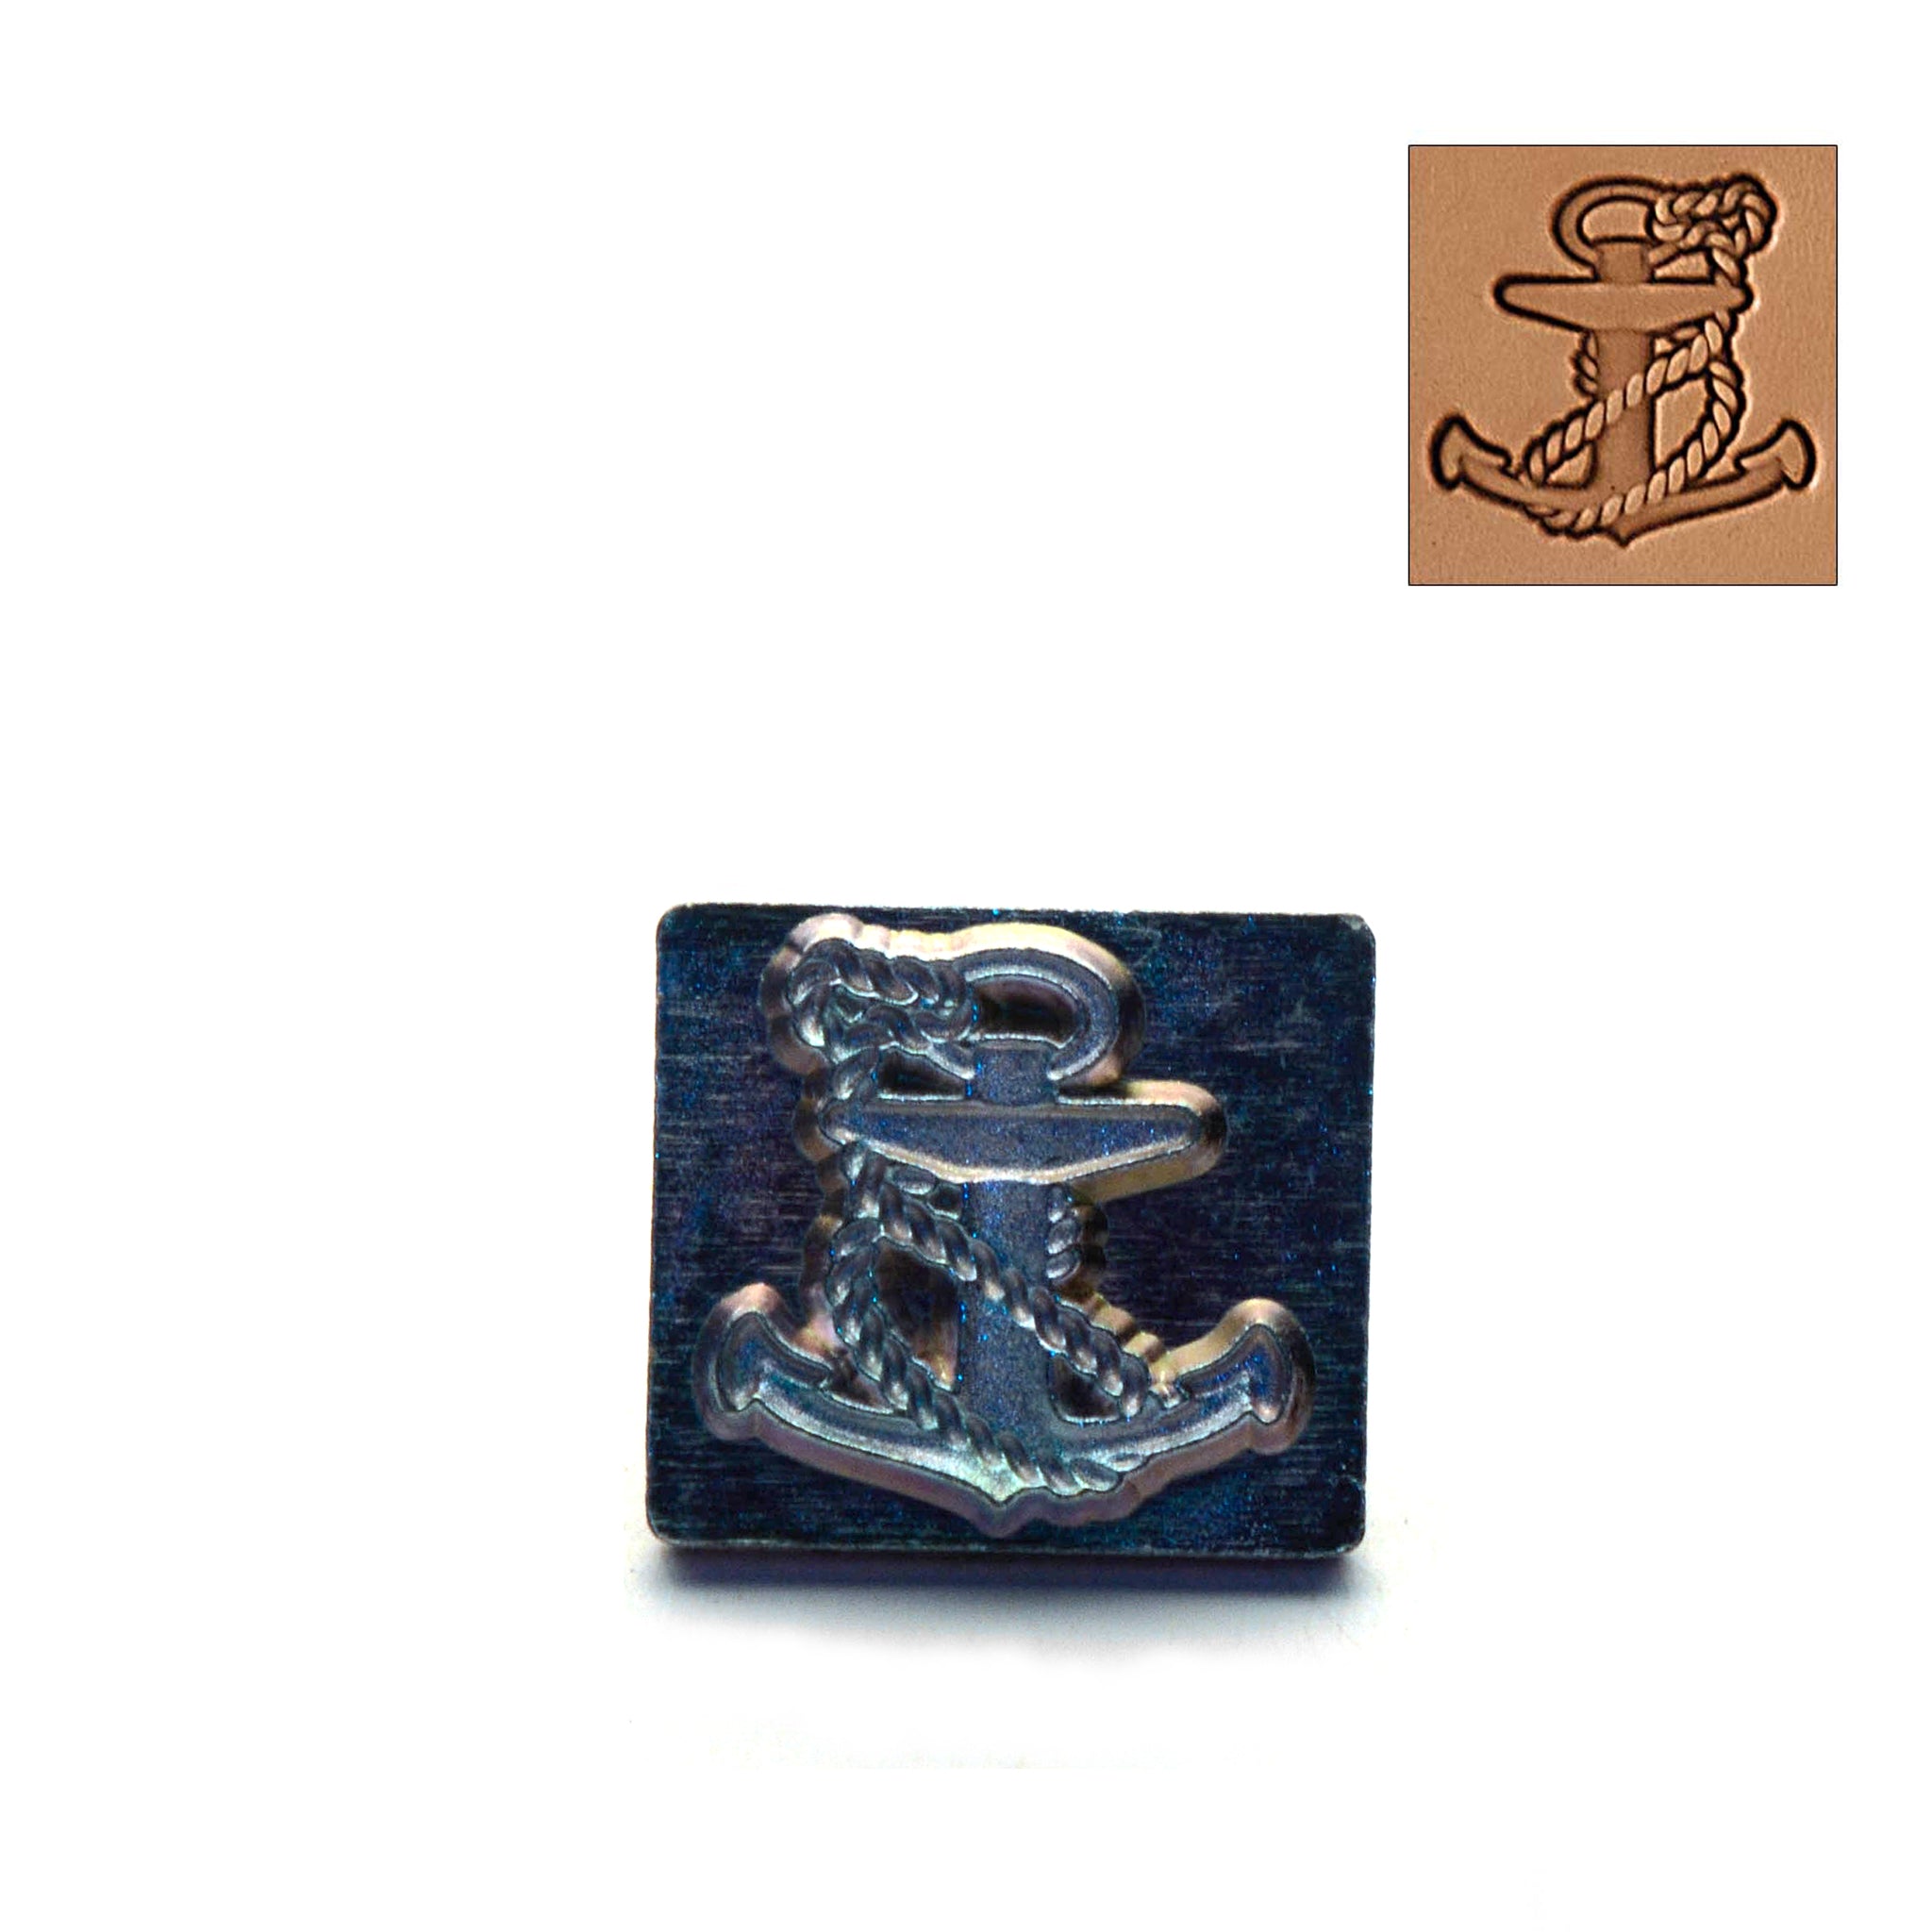 Nautical Anchor 3D Embossing Stamp from Identity Leathercraft